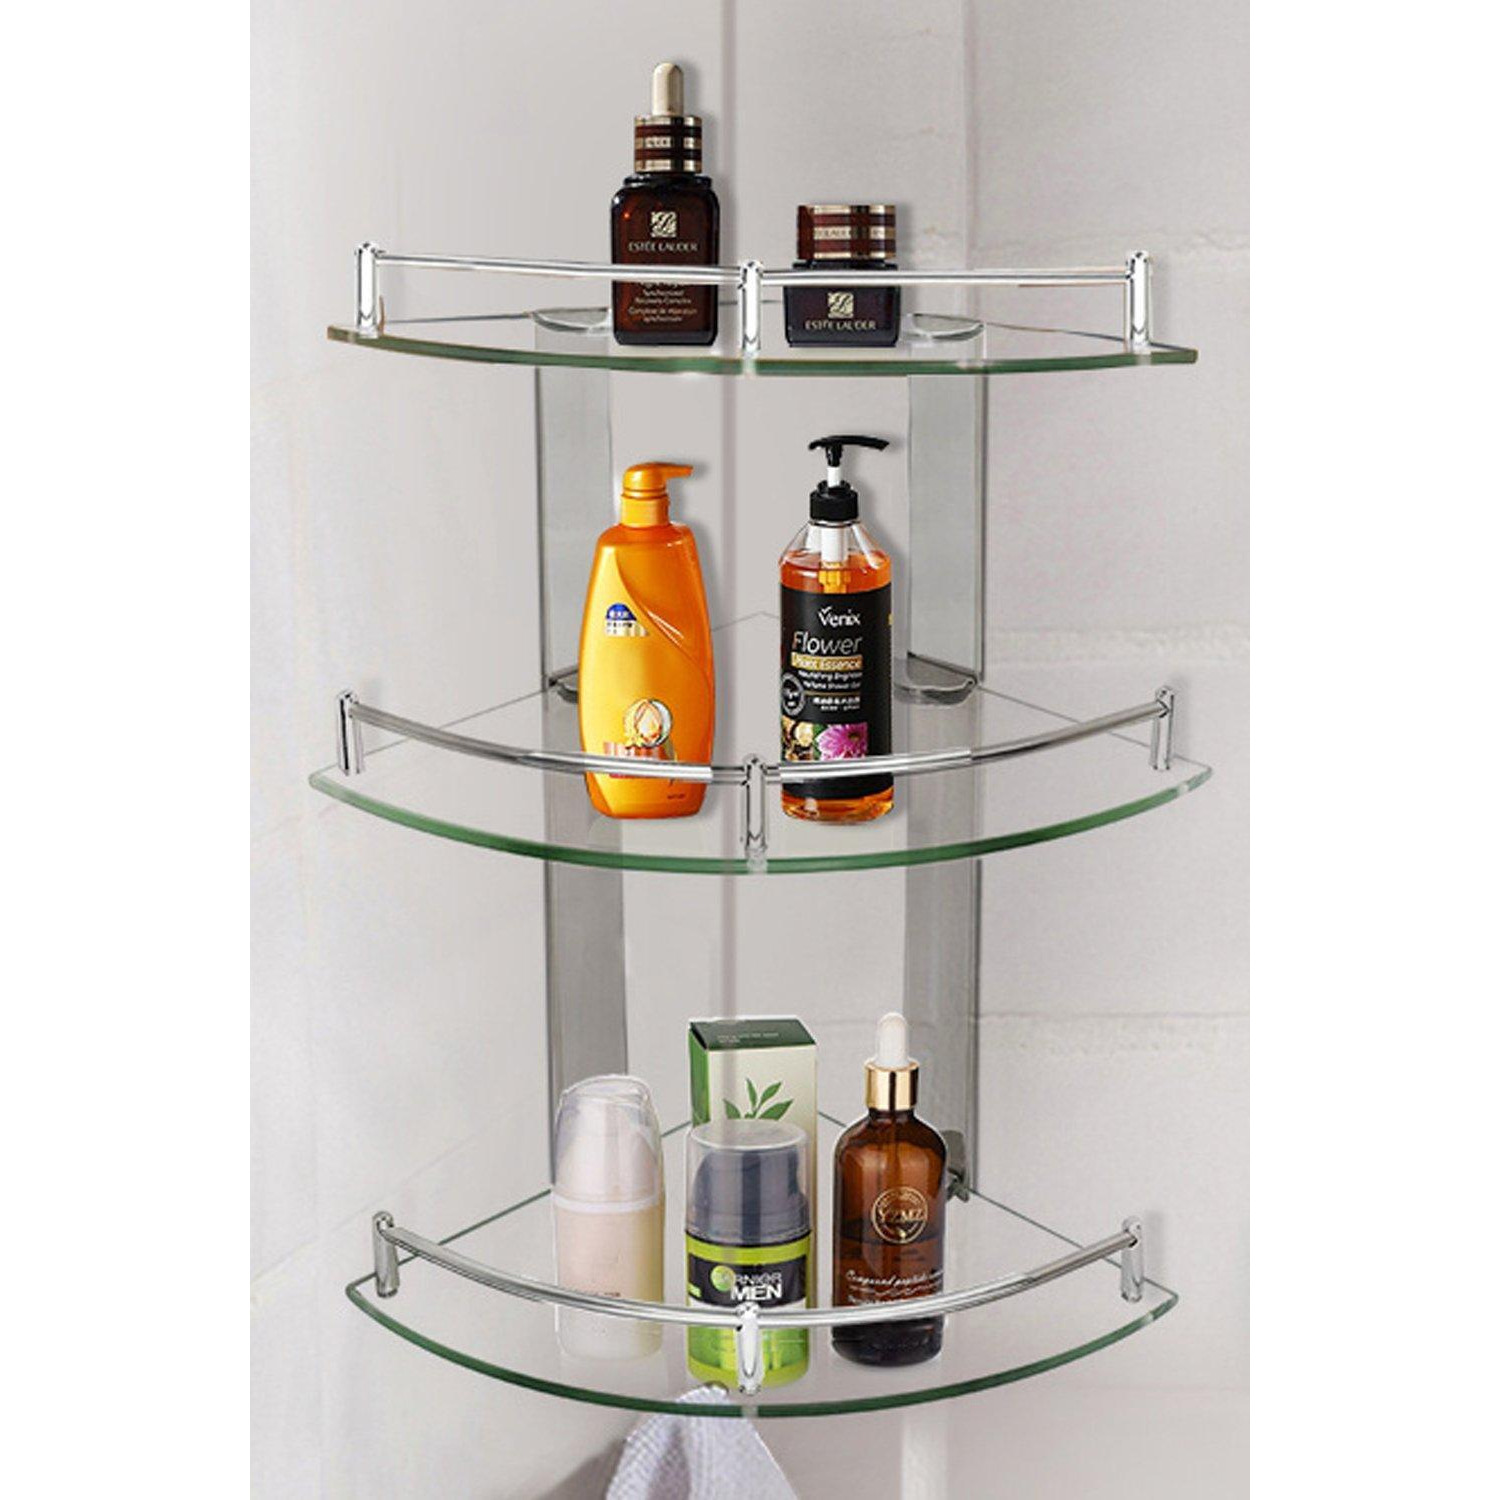 3 Tiers Bathroom Tempered Glass Corner Shelf with Steel Rail Wall Mounted - image 1